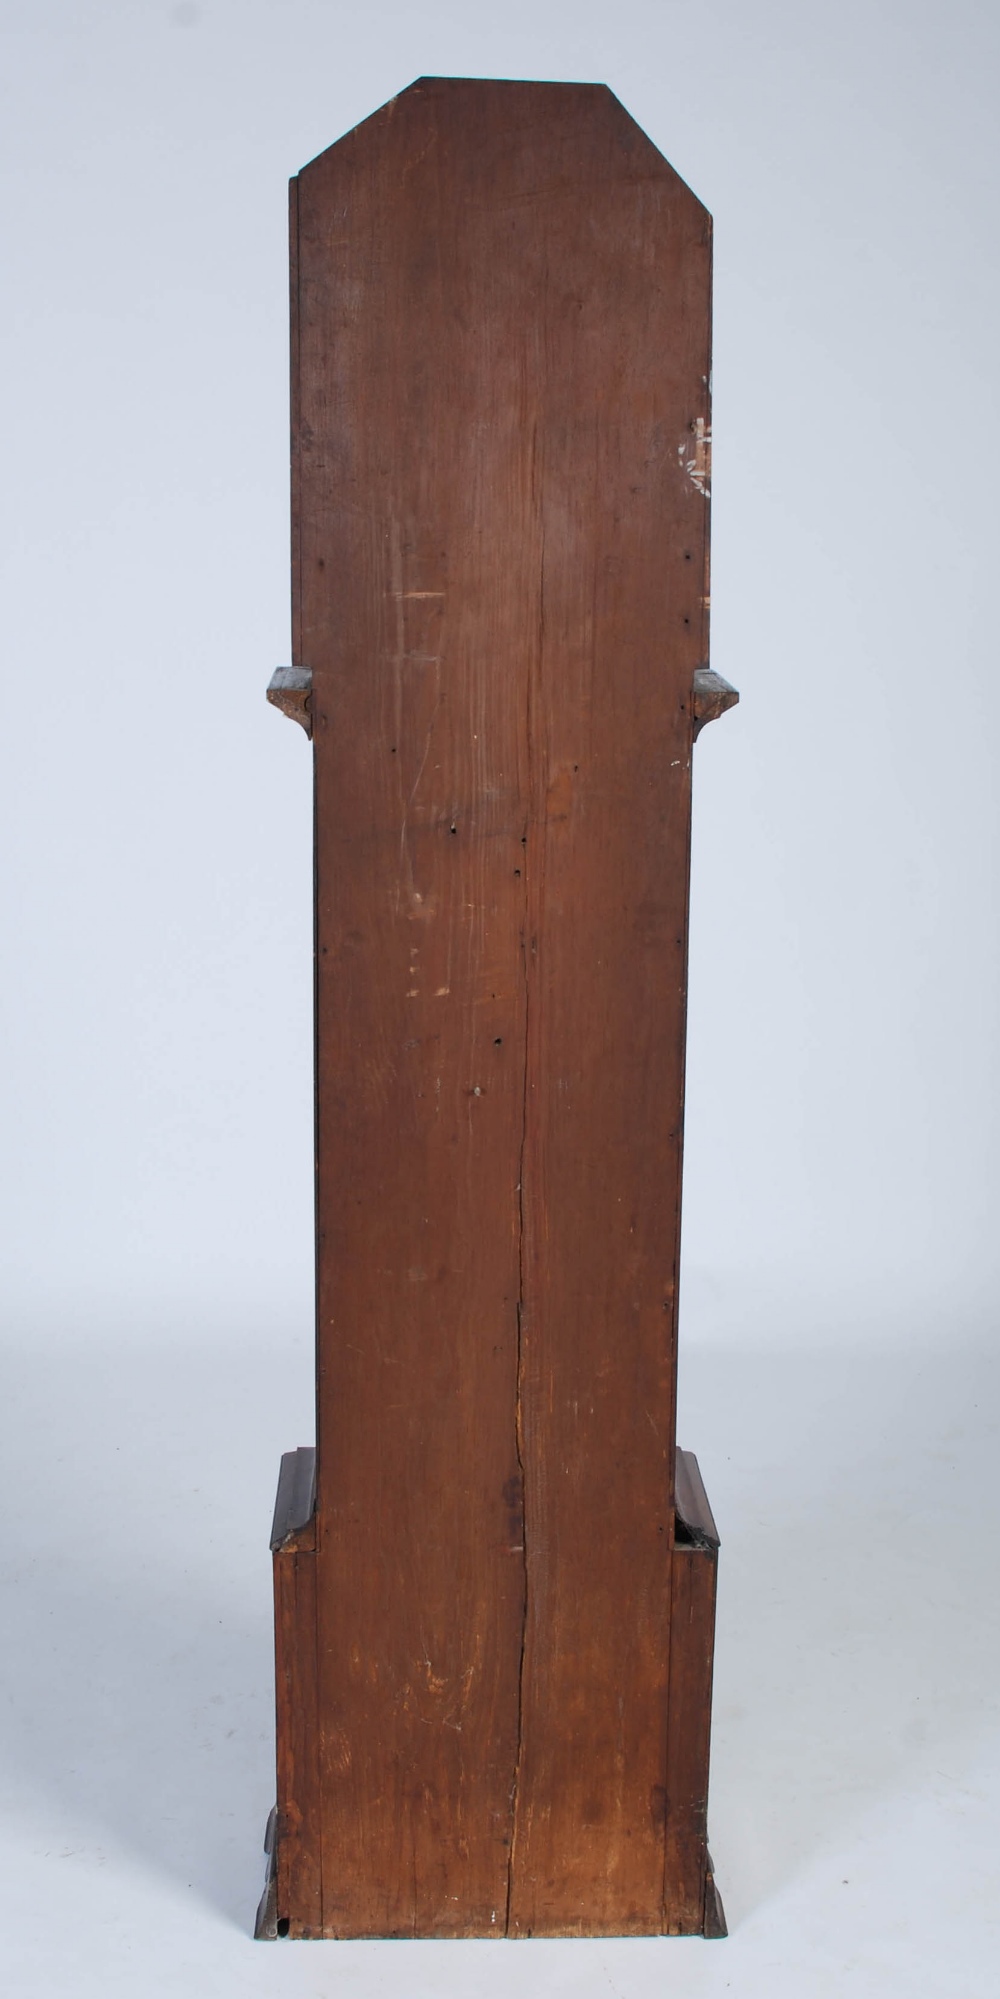 A Late 18th/ early 19th century mahogany and marquetry inlaid longcase clock, A. Buchan, Bridgend, - Image 9 of 9